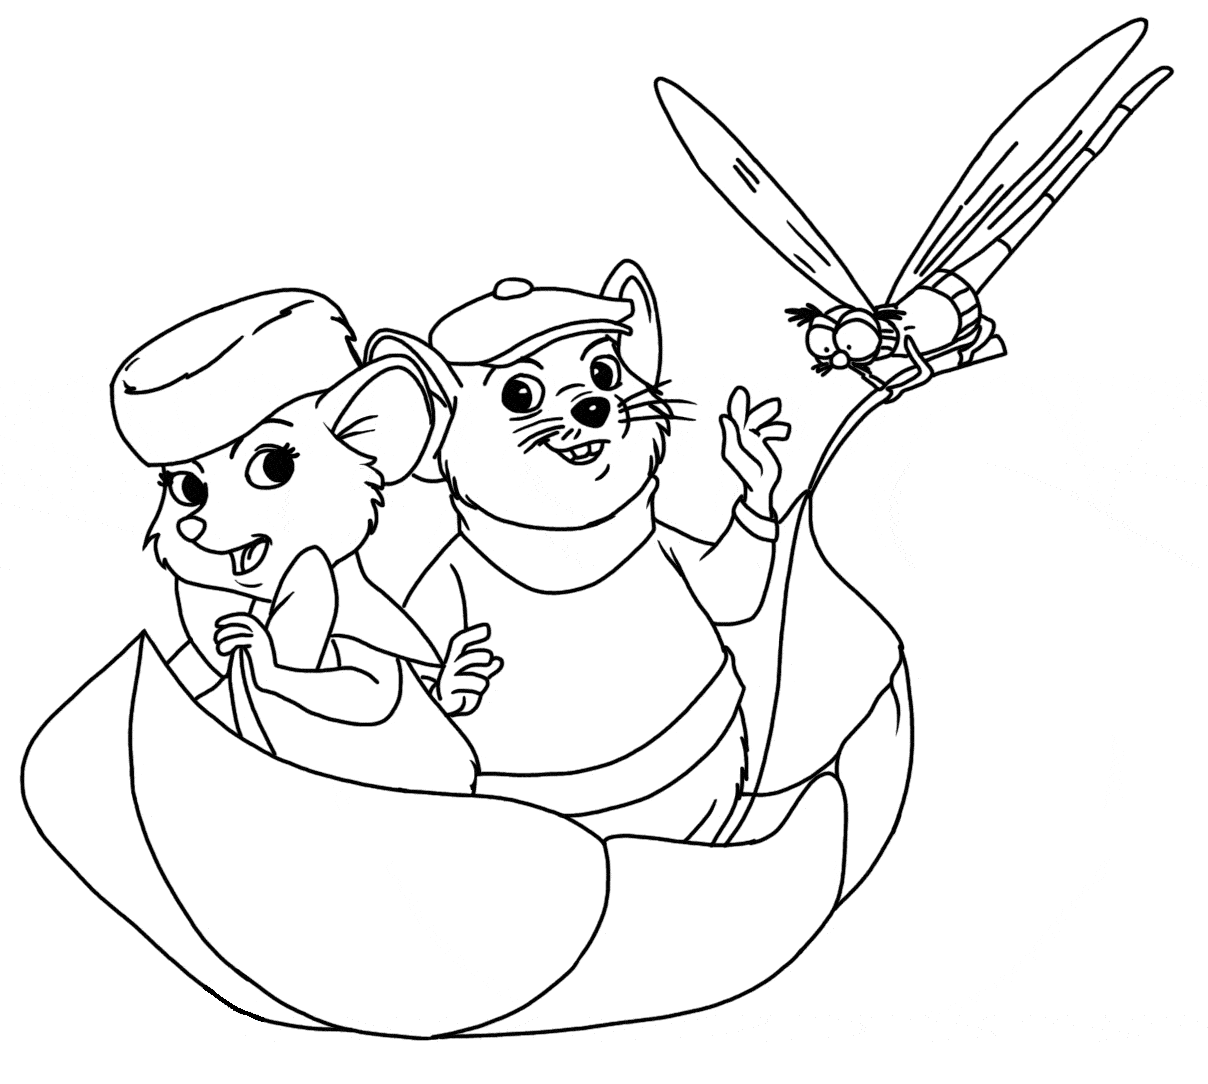 Bernard, Bianca and Evinrude Coloring Page